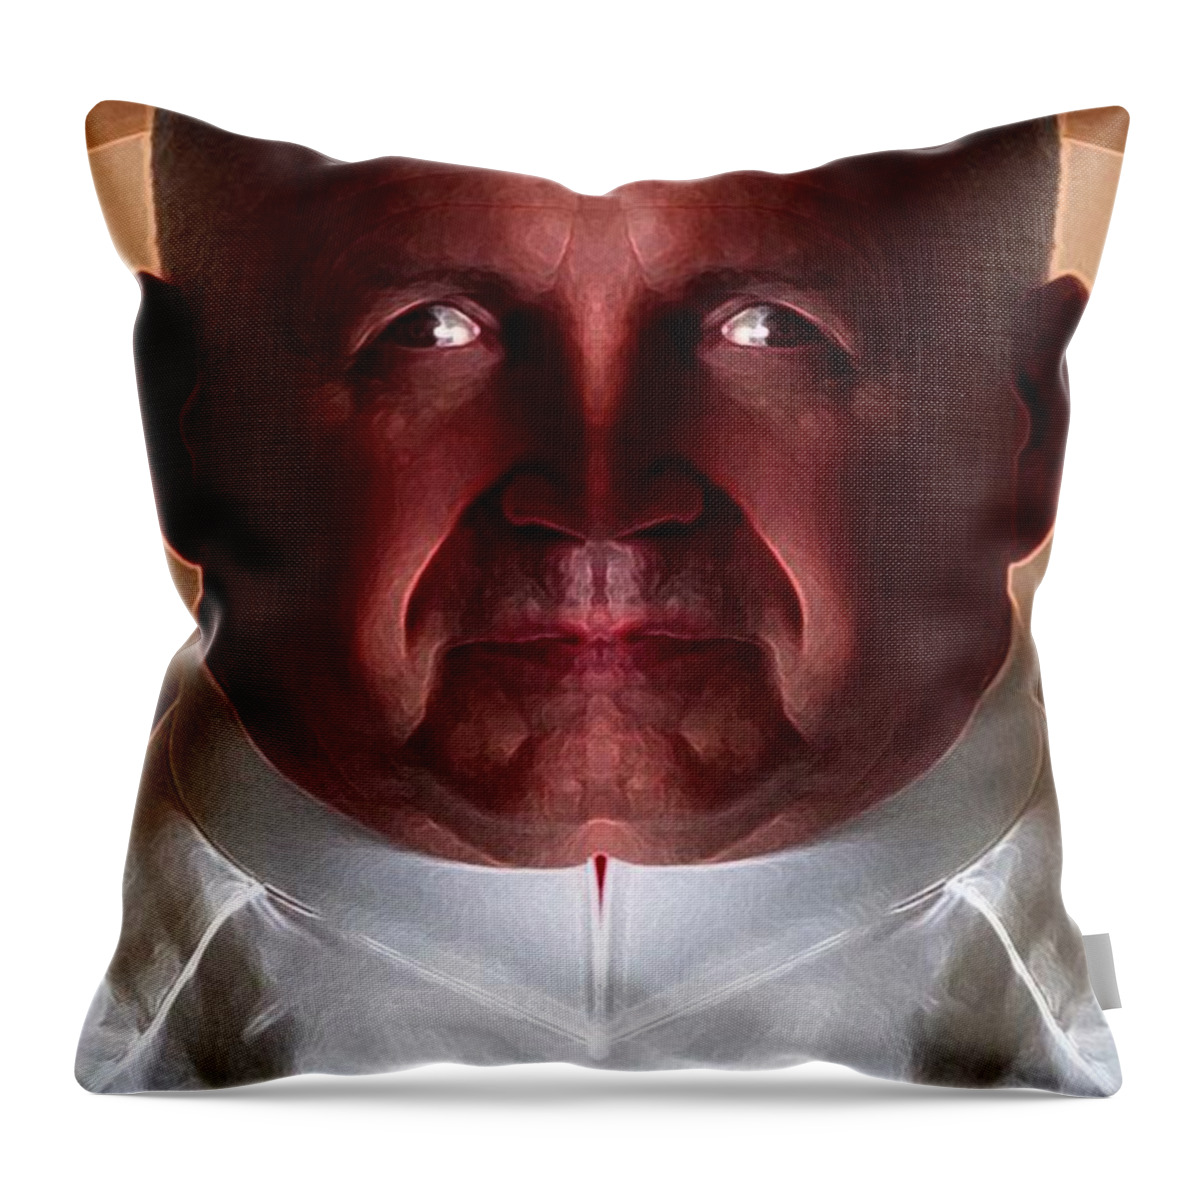 Portrait Throw Pillow featuring the digital art All Seeing by Ronald Bissett